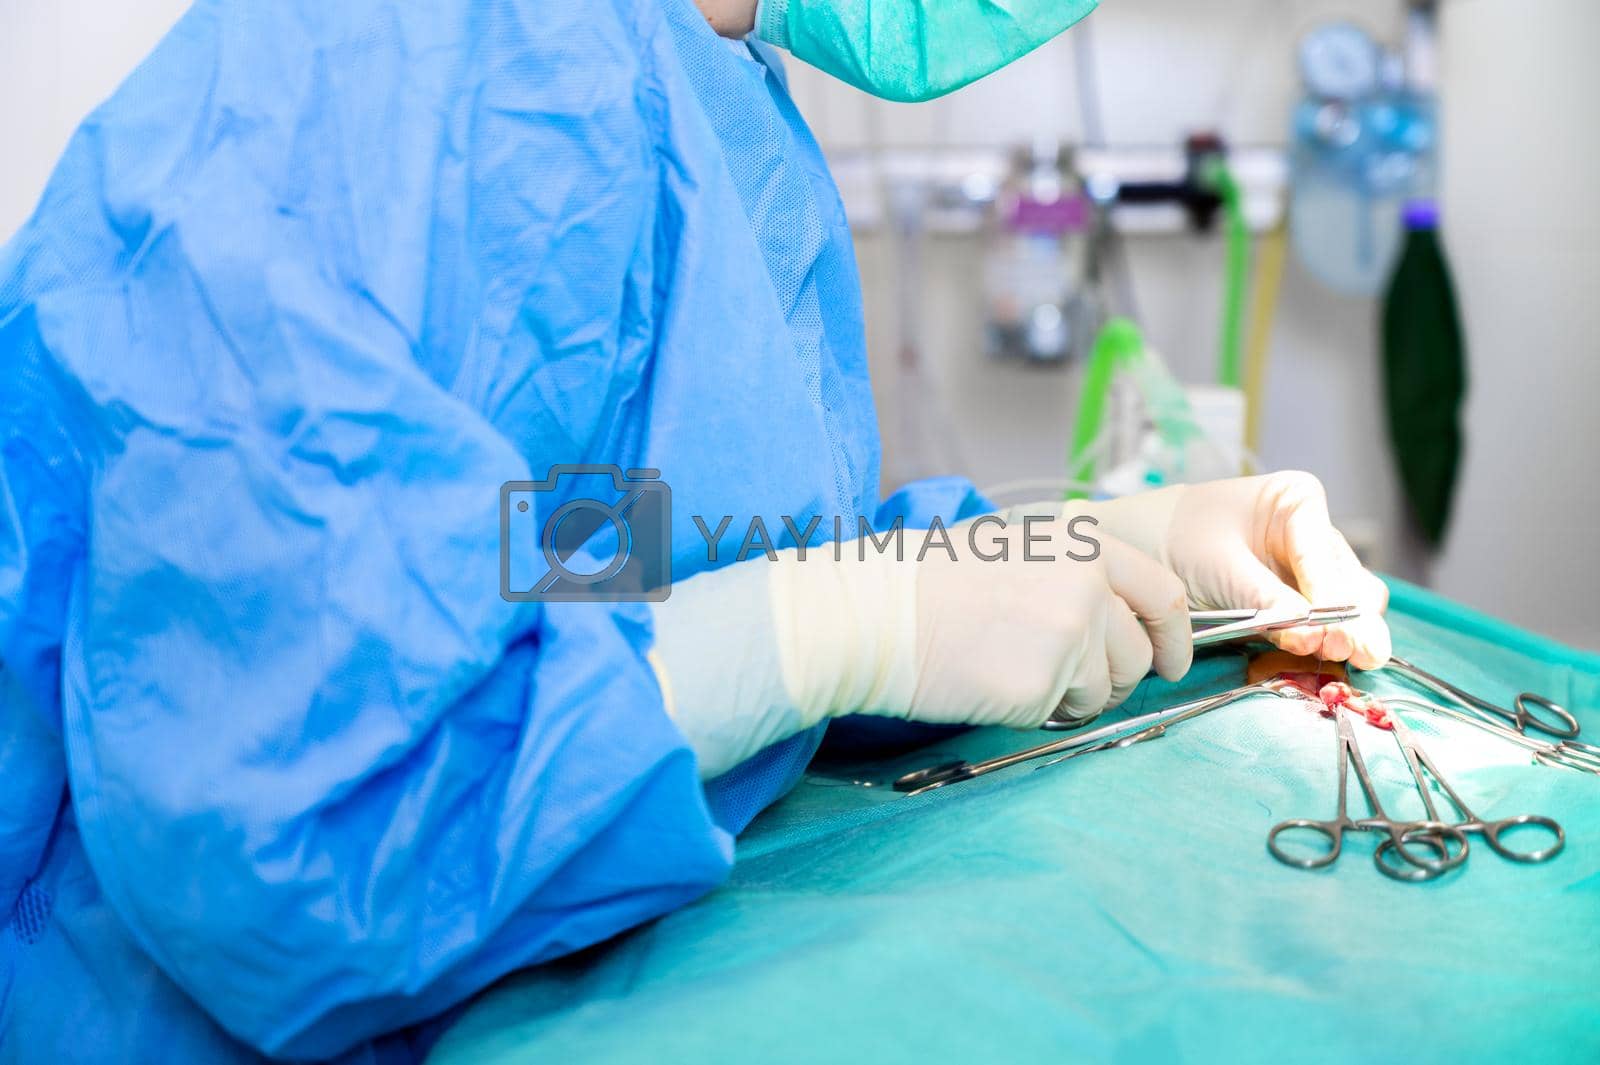 Royalty free image of Close-up portrait of female surgeon wearing sterile clothing operating at operating room. by HERRAEZ